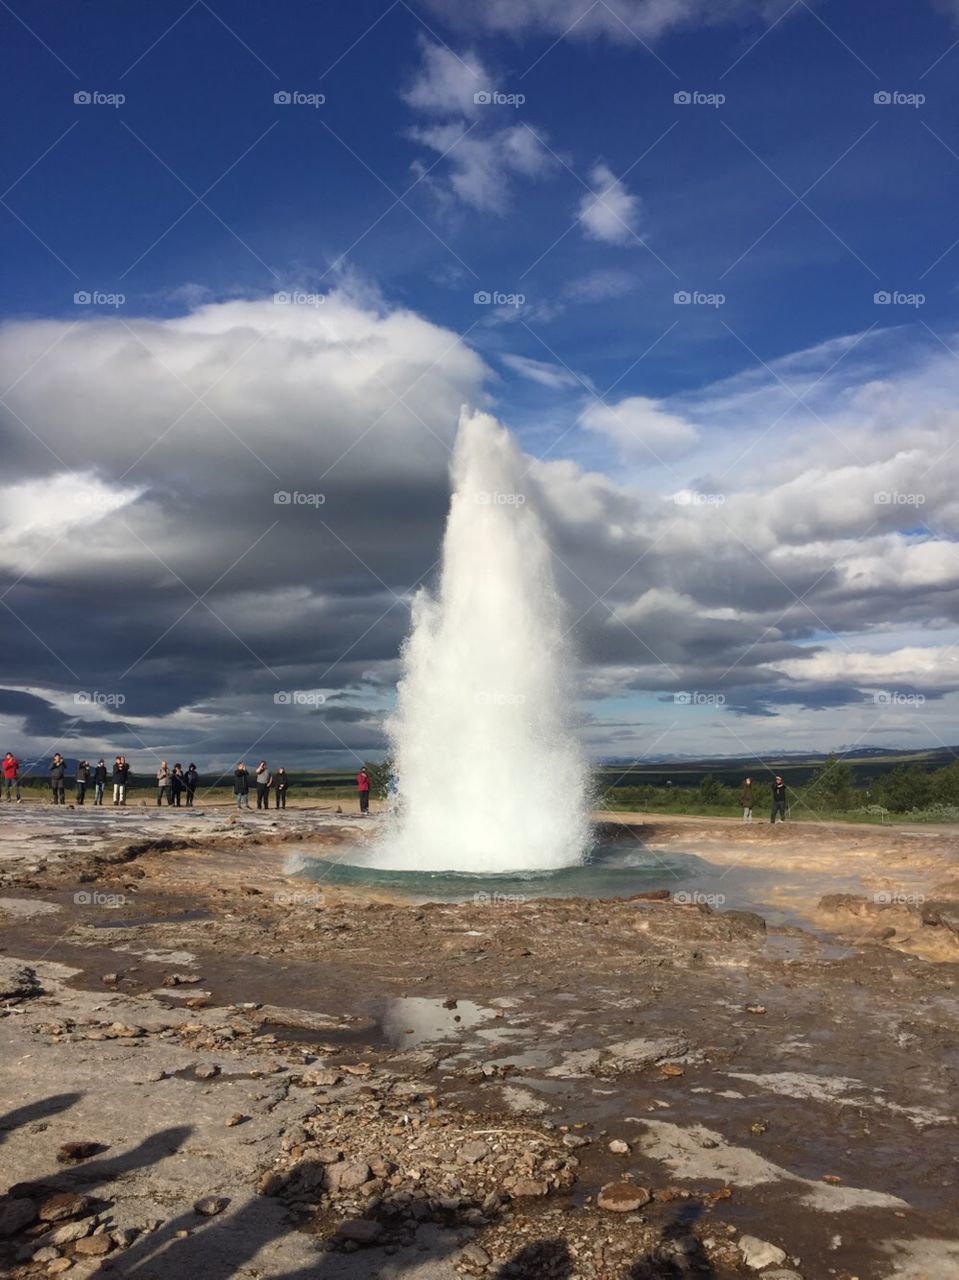 Geyser erupts from the ground! Blue skies with white clouds, green fields in the background. 